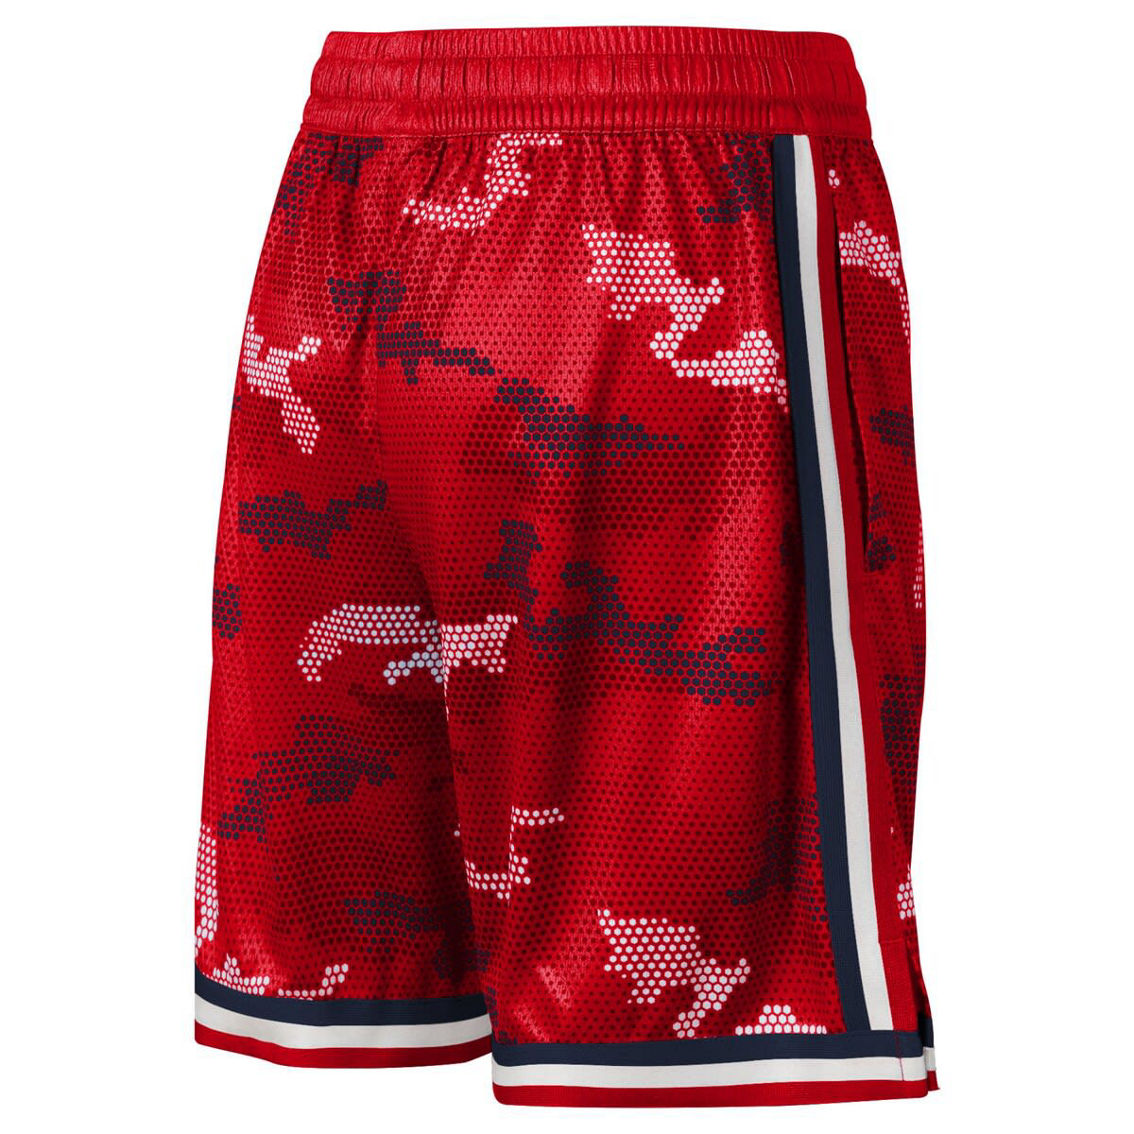 Outerstuff Youth Fanatics Red St. Louis Cardinals Tech Runner Shorts - Image 4 of 4